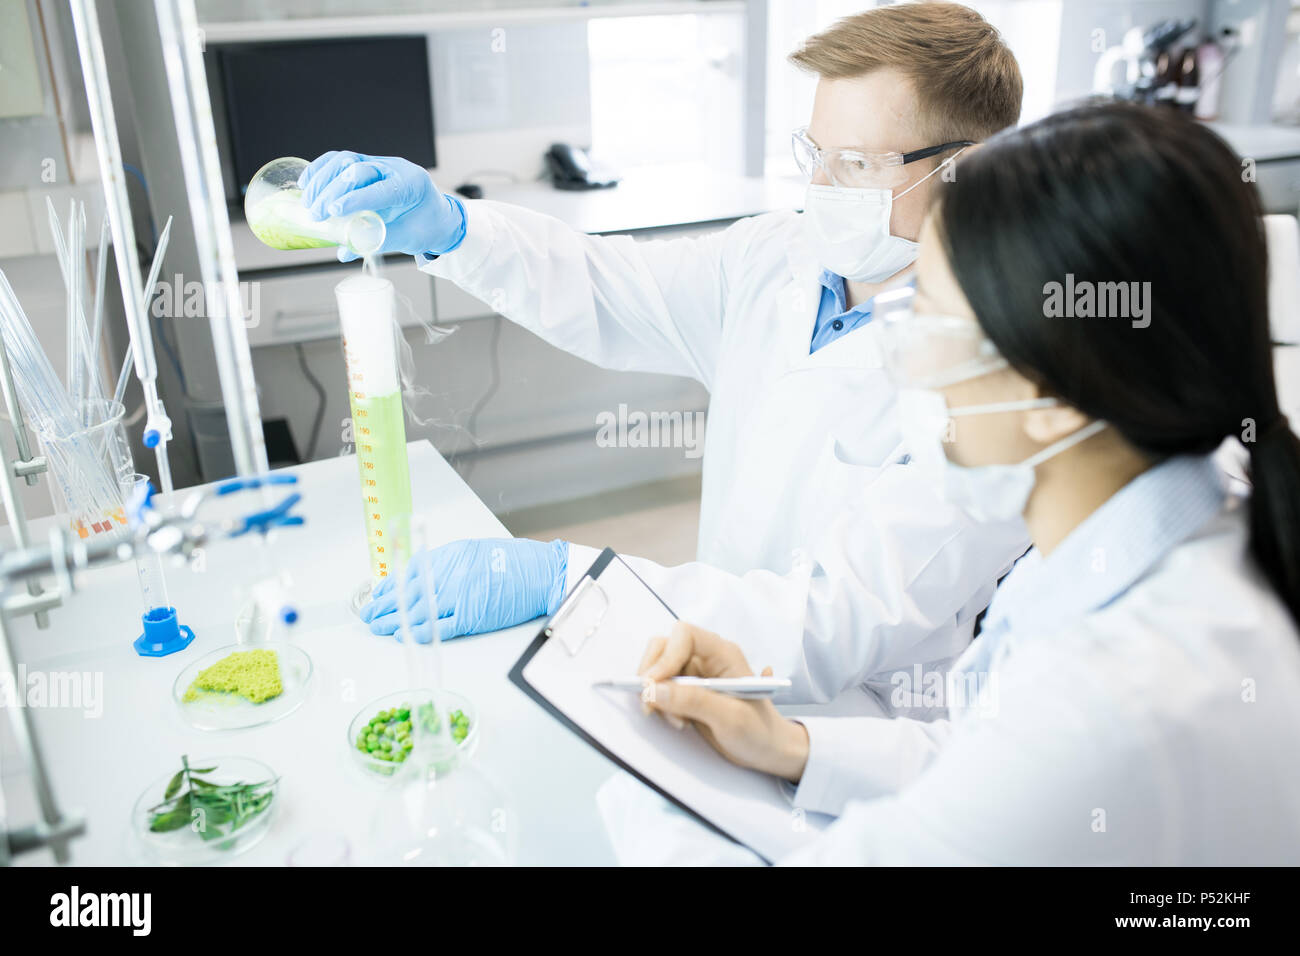 Microbiologists conducting experiment with green vegetable sample Stock Photo